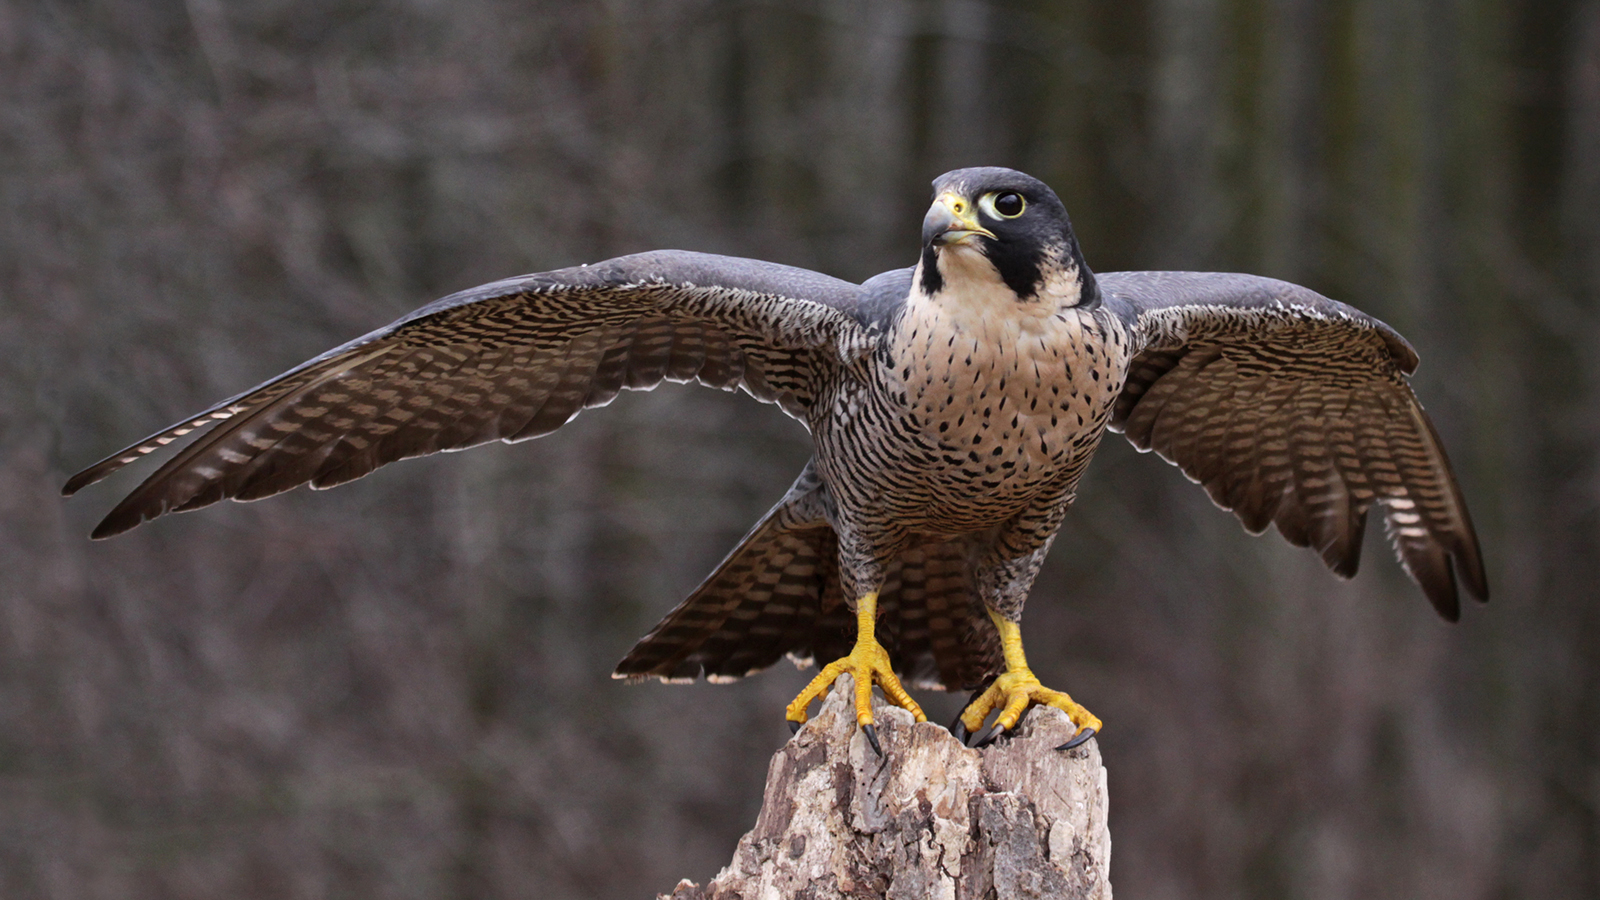 Peregrine Falcon with wings extended